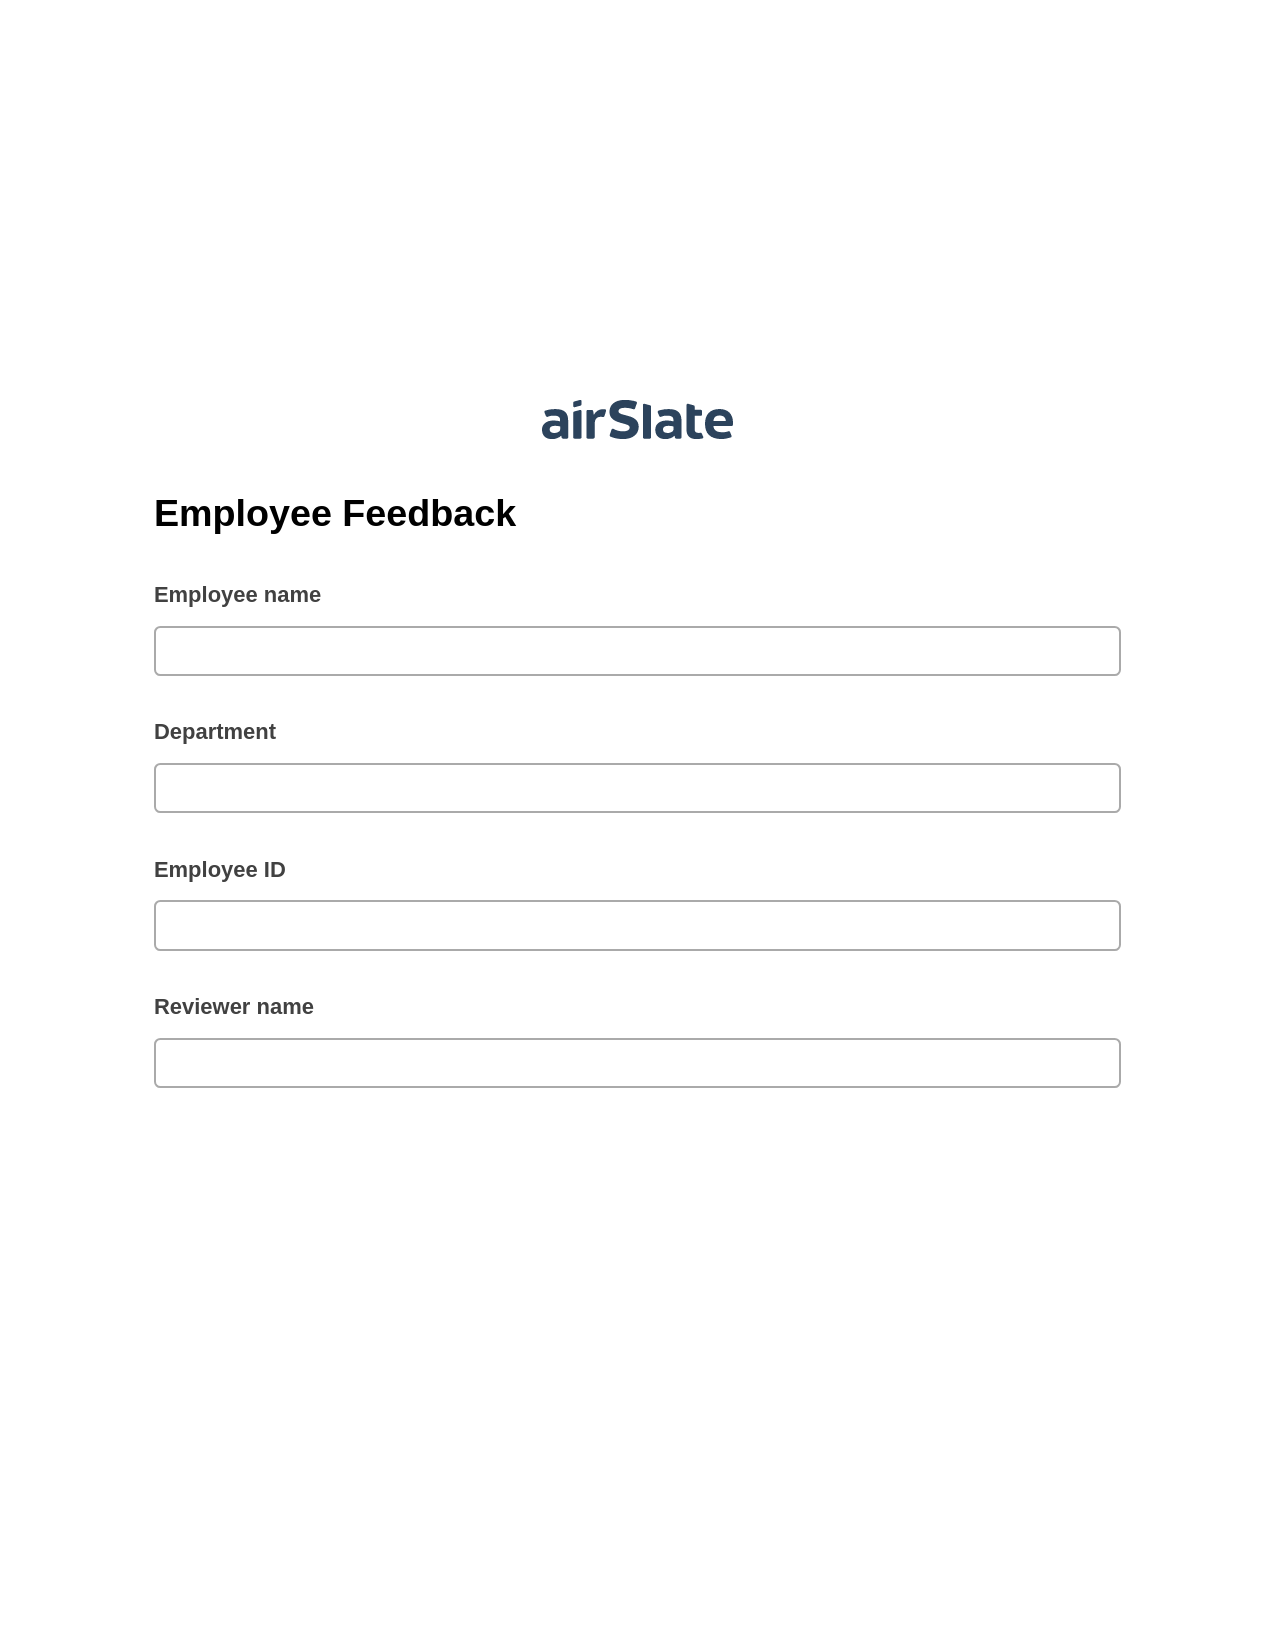 Employee Feedback Pre-fill Dropdown from Airtable, Document Hide Bot, Google Drive Bot